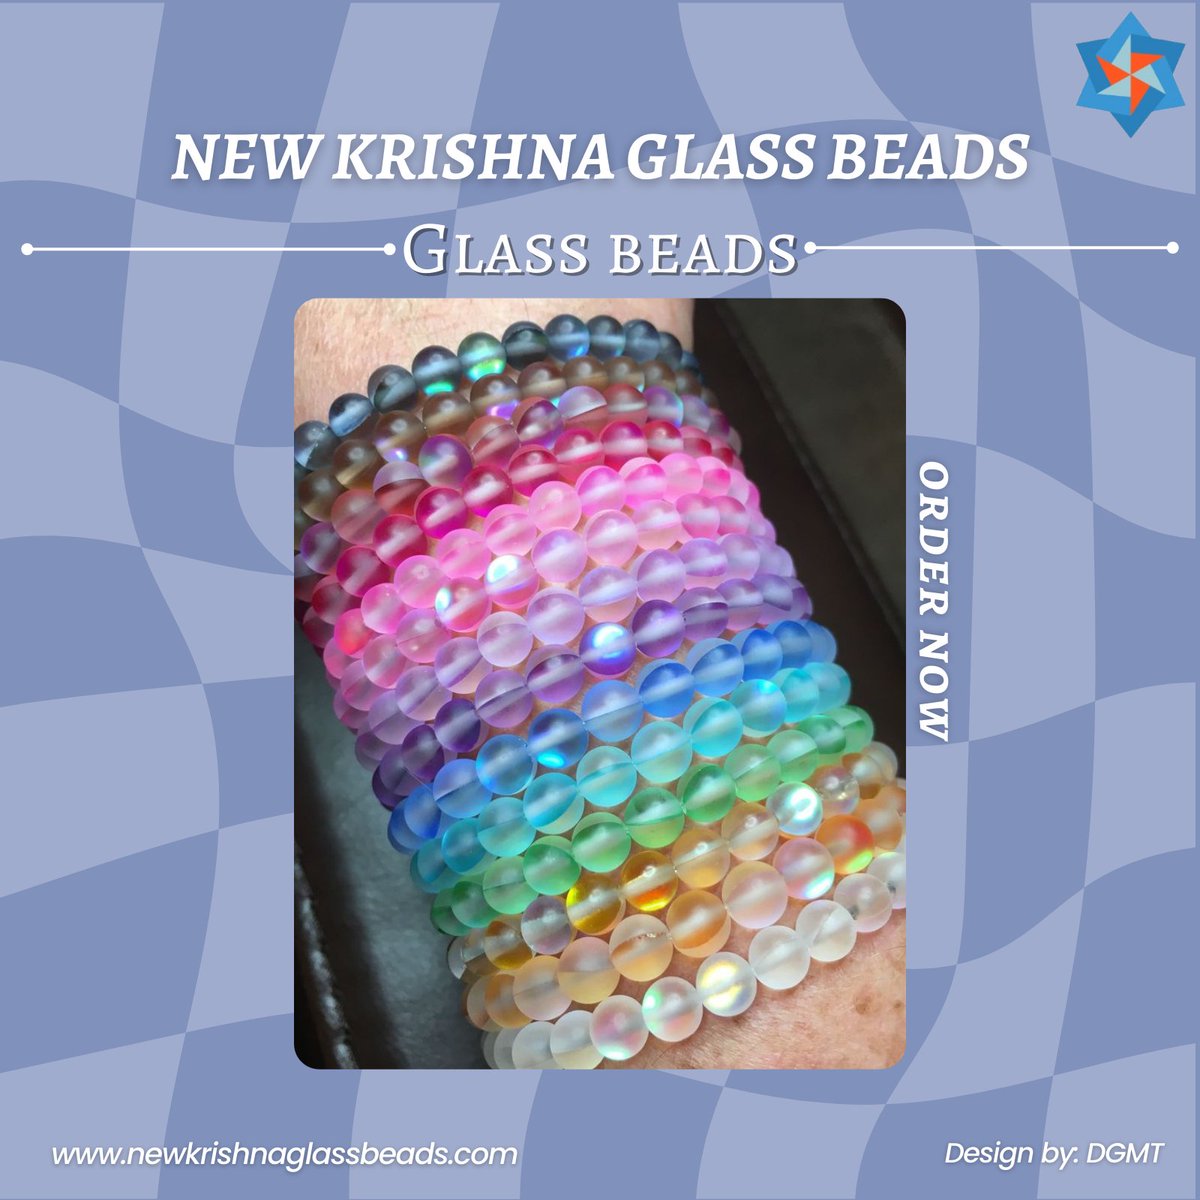 Don't miss out on the opportunity to enjoy exclusive pricing and explore our latest glass bead designs! ✨ Stay updated with our newest offerings—ensure you seize these special deals!

#KrishnaGlassBeads #Craftsmanship #UniqueStyle #KrishnaGlassBeads #CraftedWithPrecision